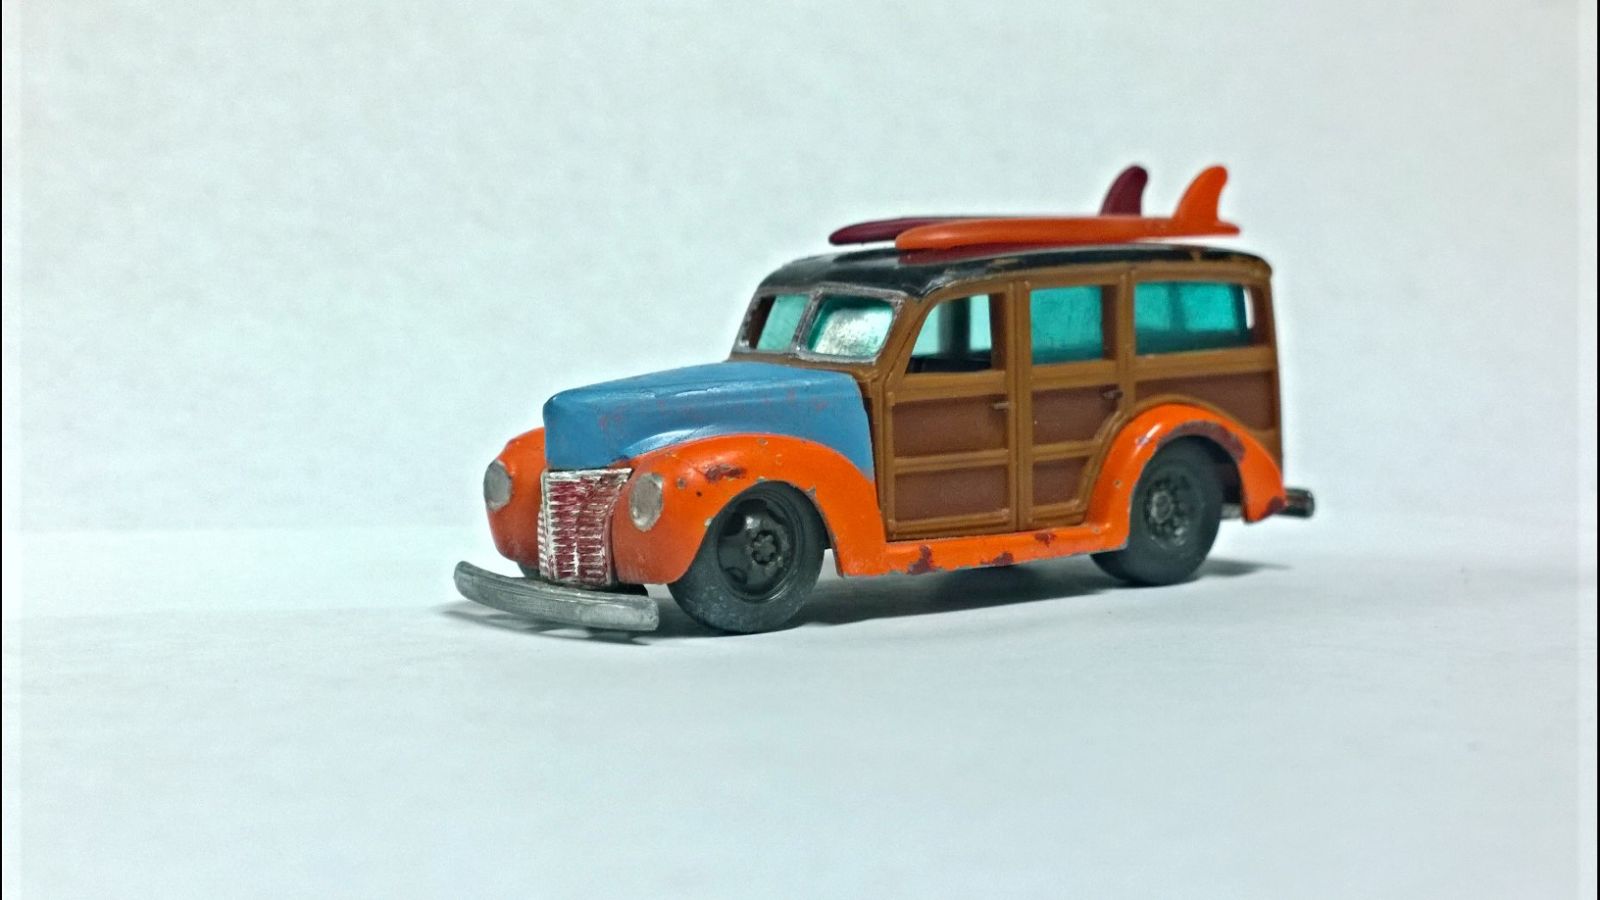 Illustration for article titled CUSTOM! Finished Woody wind-up! Lots of build pics